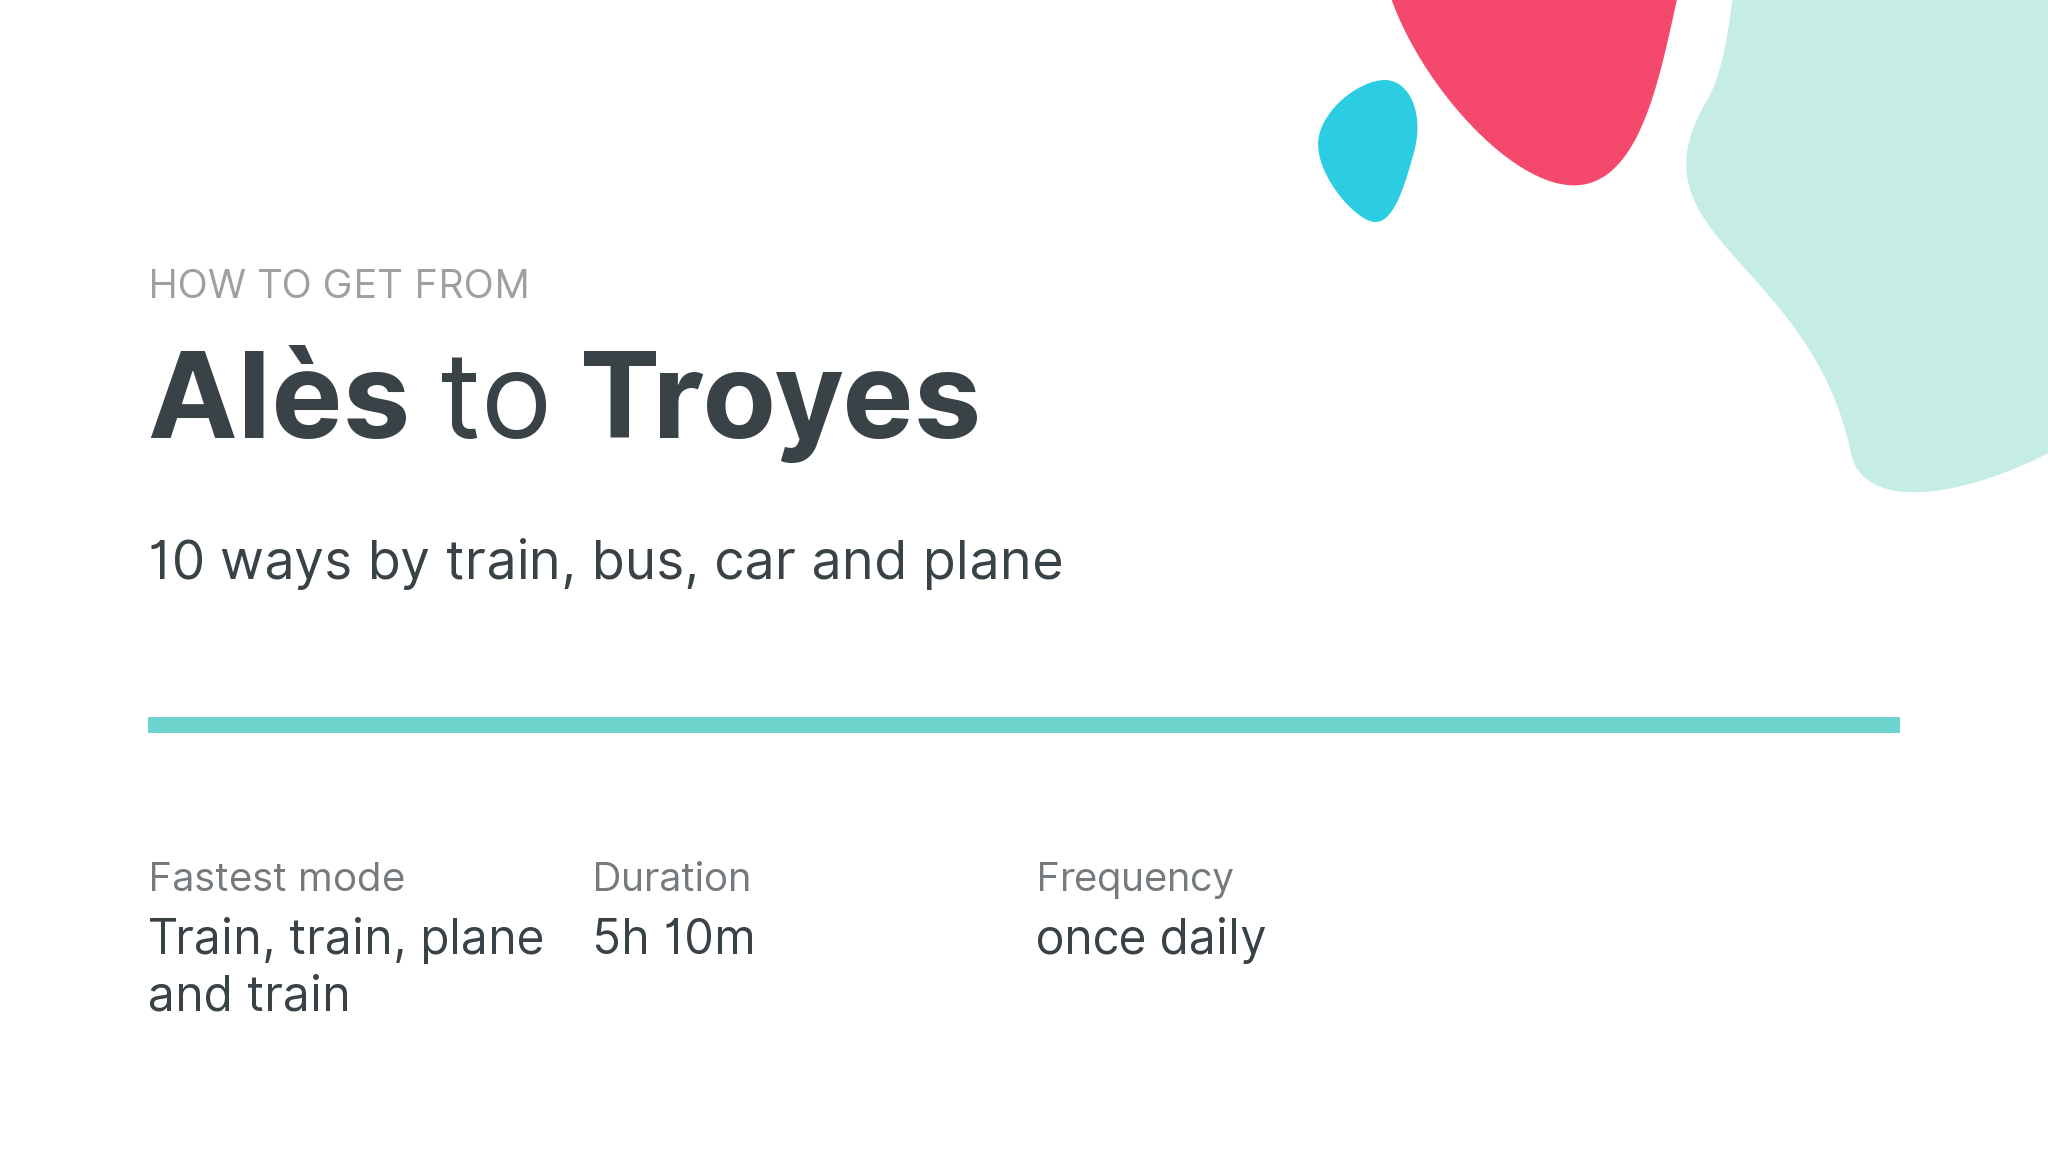 How do I get from Alès to Troyes